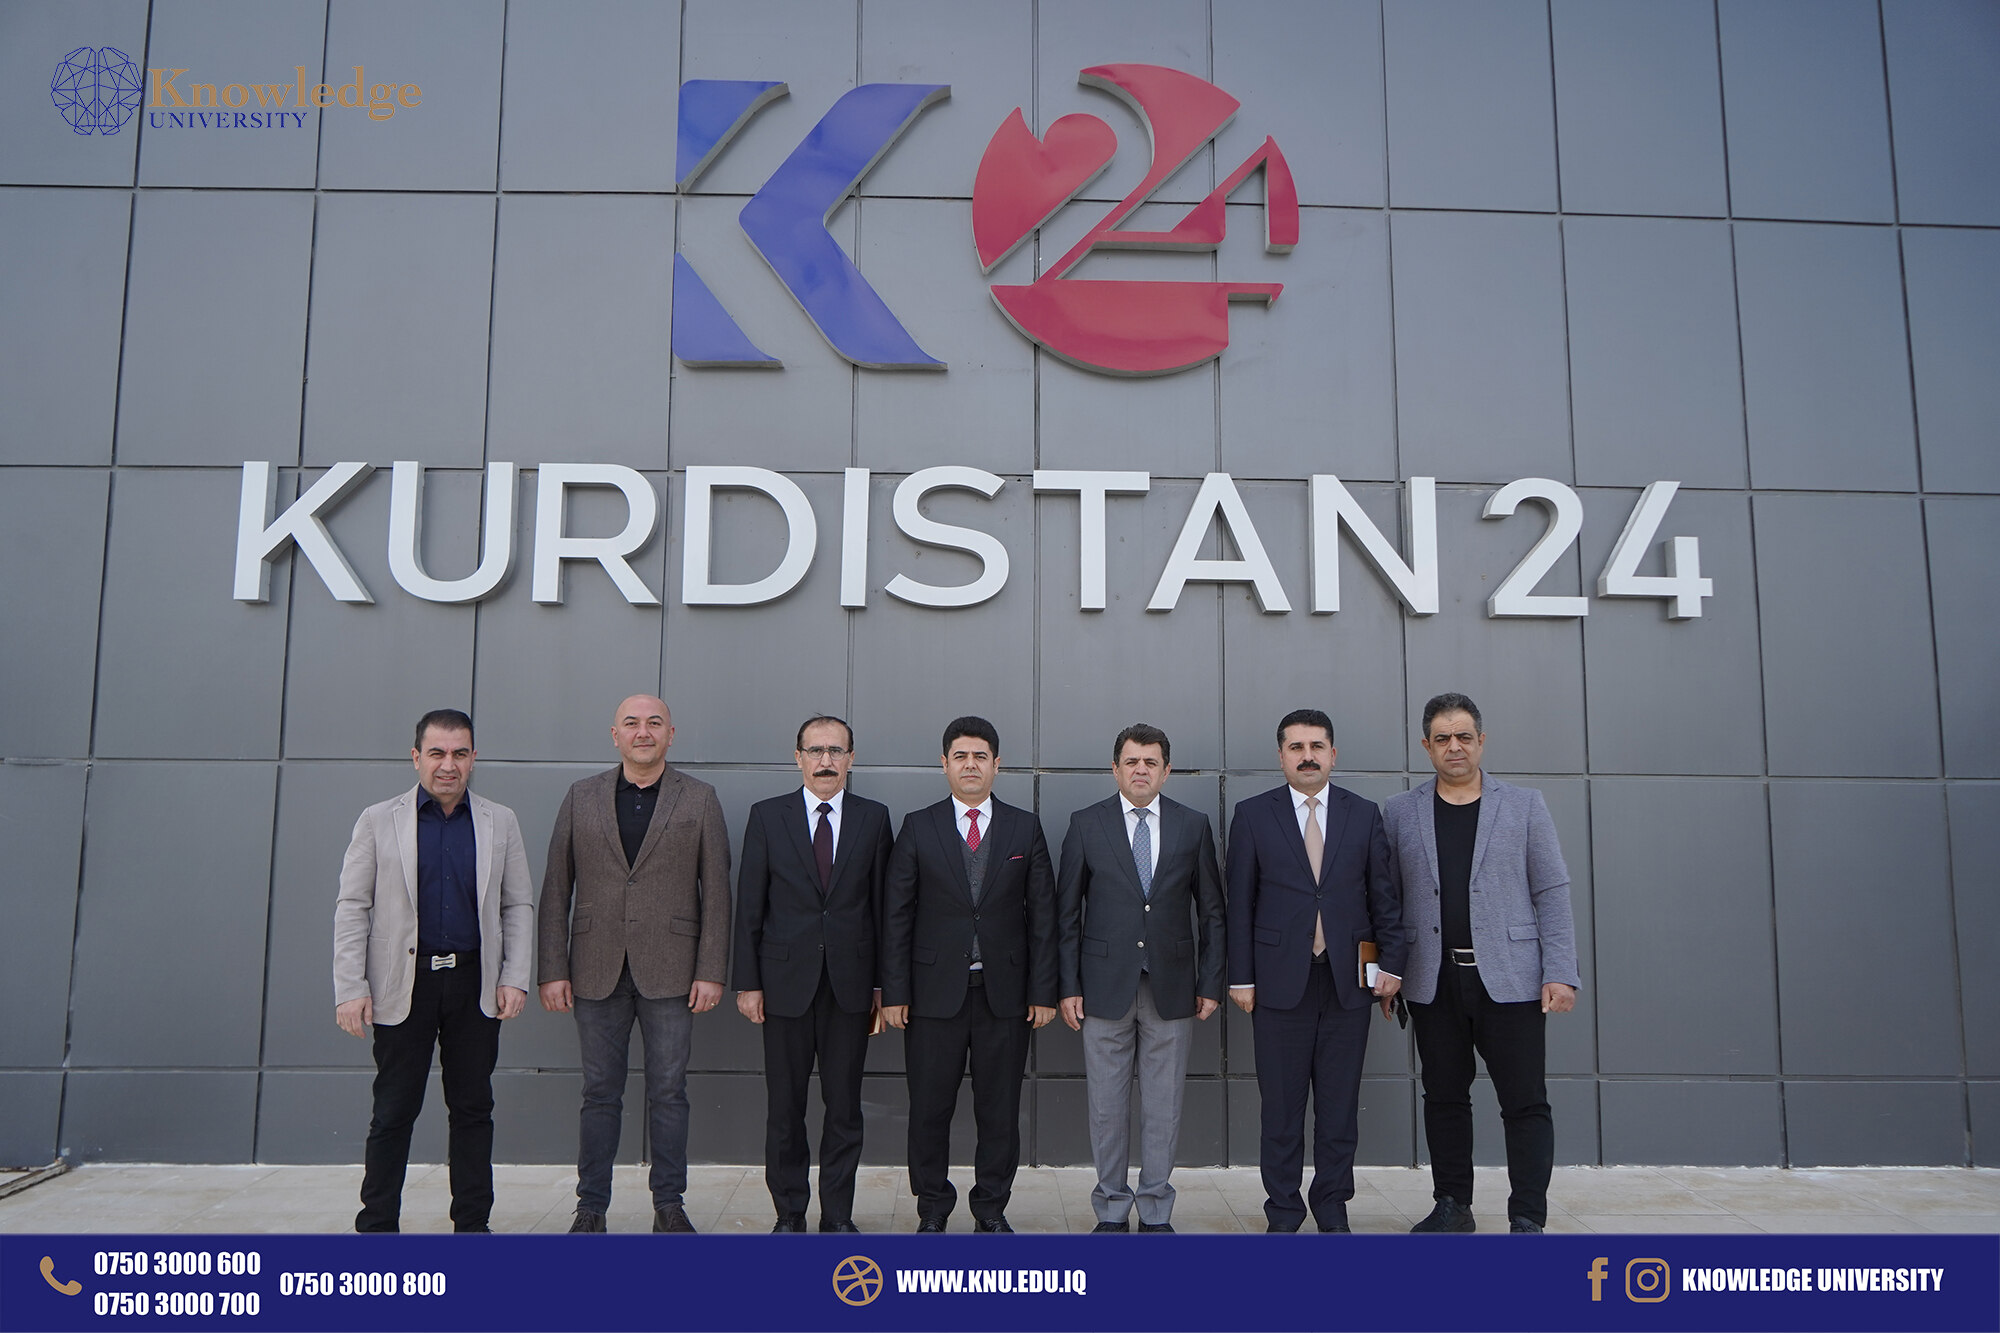 Knowledge University Delegation Forges Collaborative Ties with Kurdistan24 TV